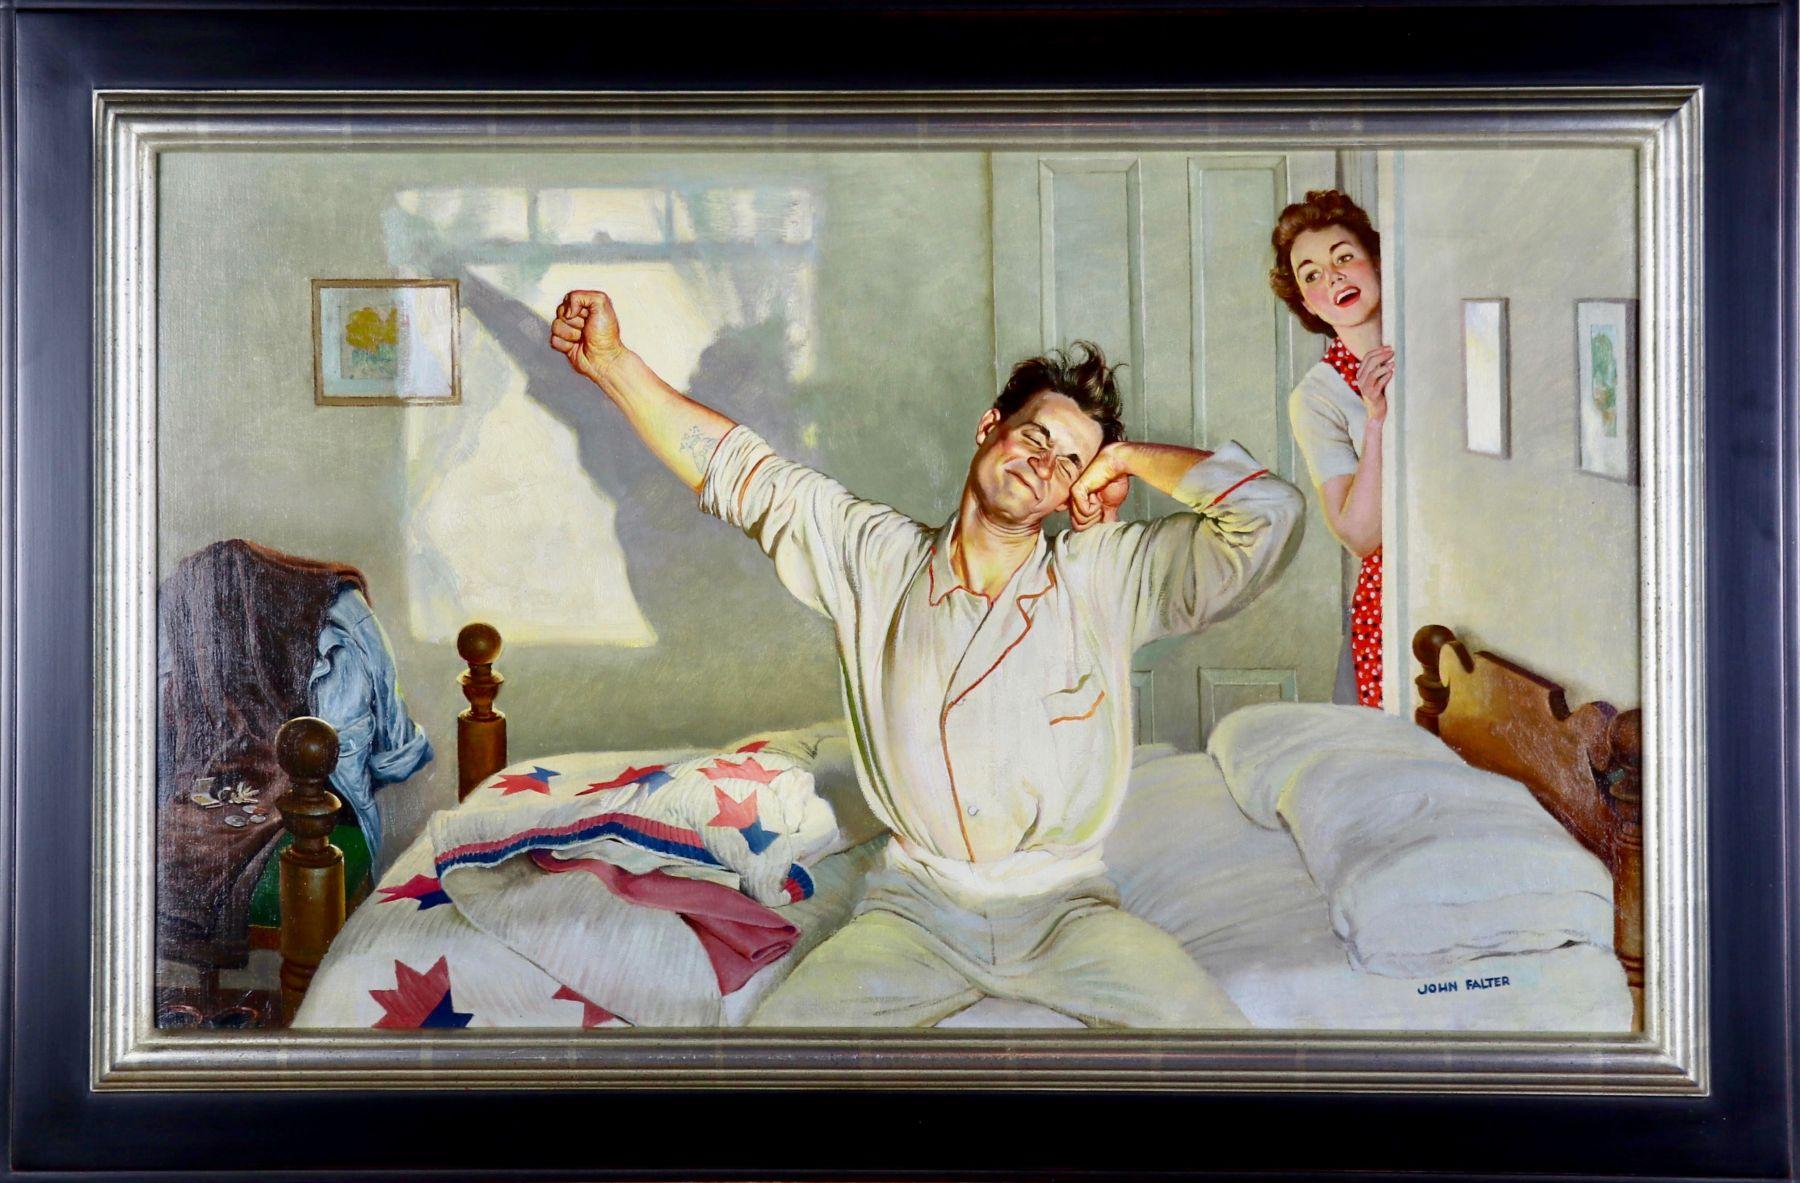 Waking Up - Painting by John Philip Falter